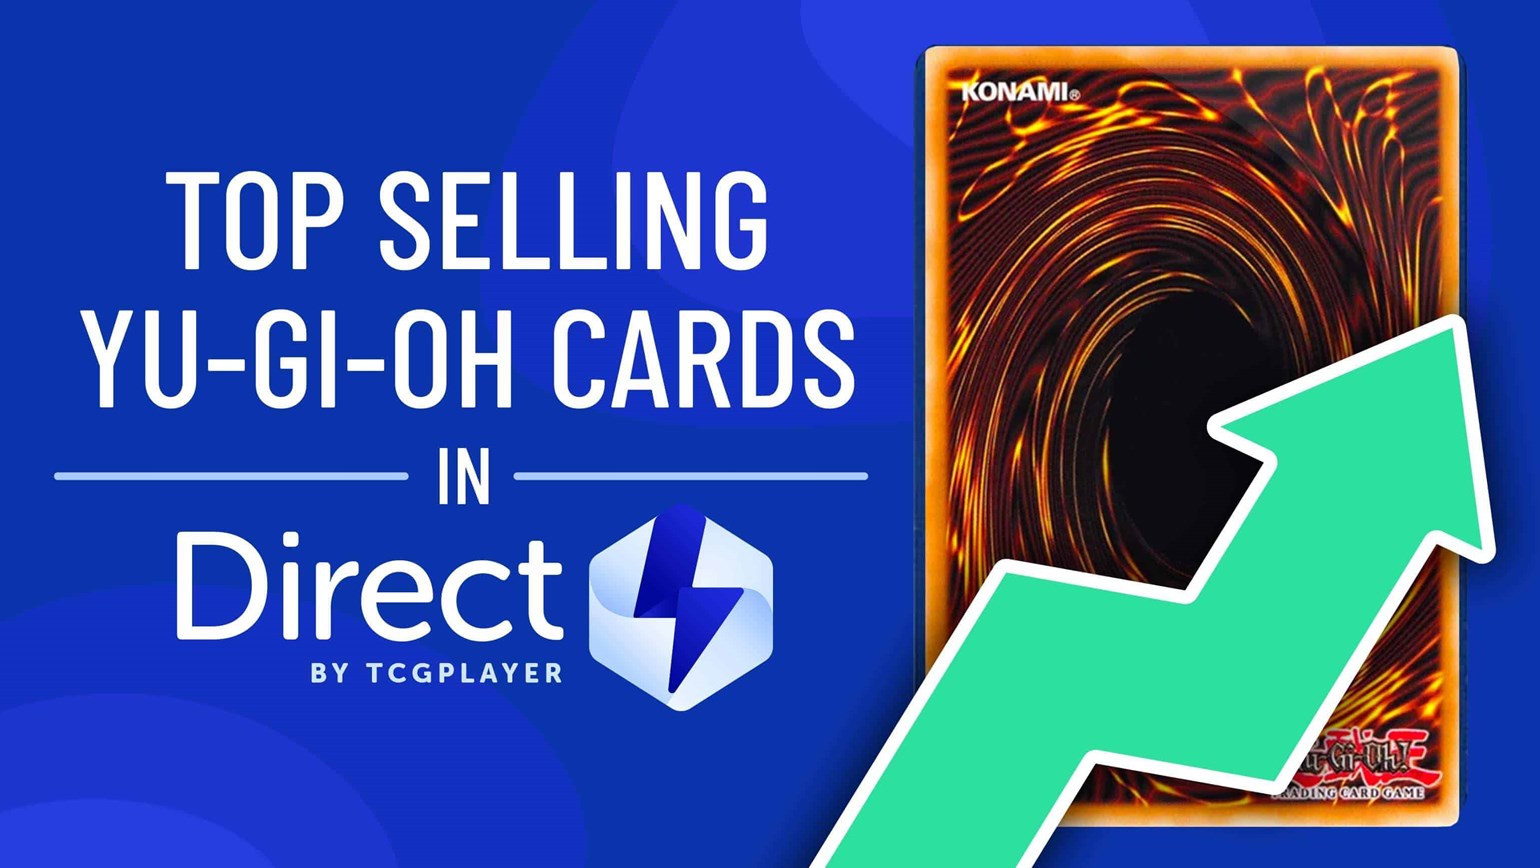 April Top Selling Yu-Gi-Oh! Cards in Direct by TCGplayer